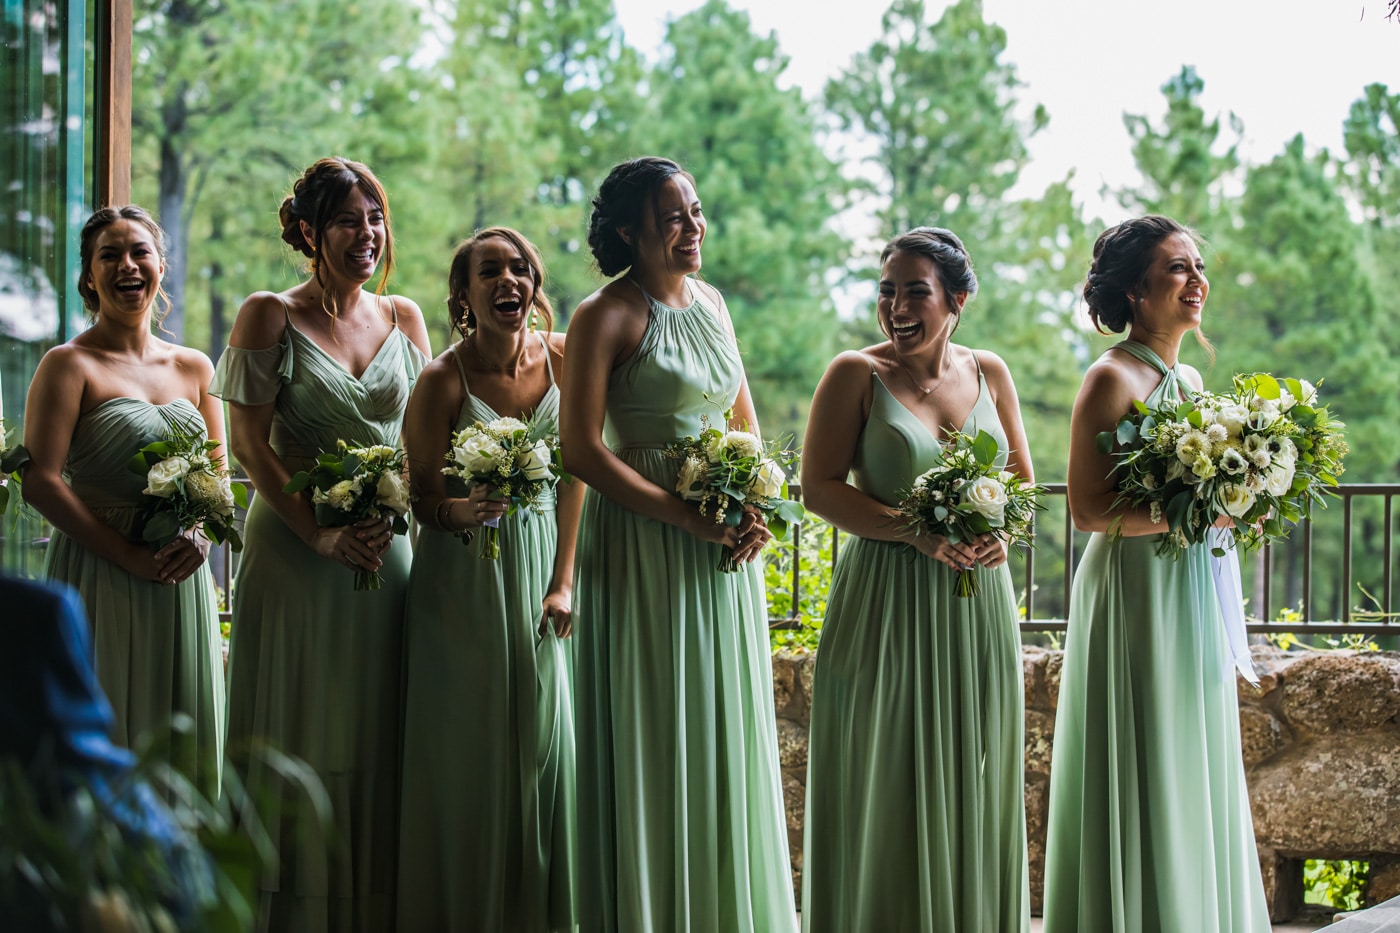 Bridesmaids smiling during ceremony candid